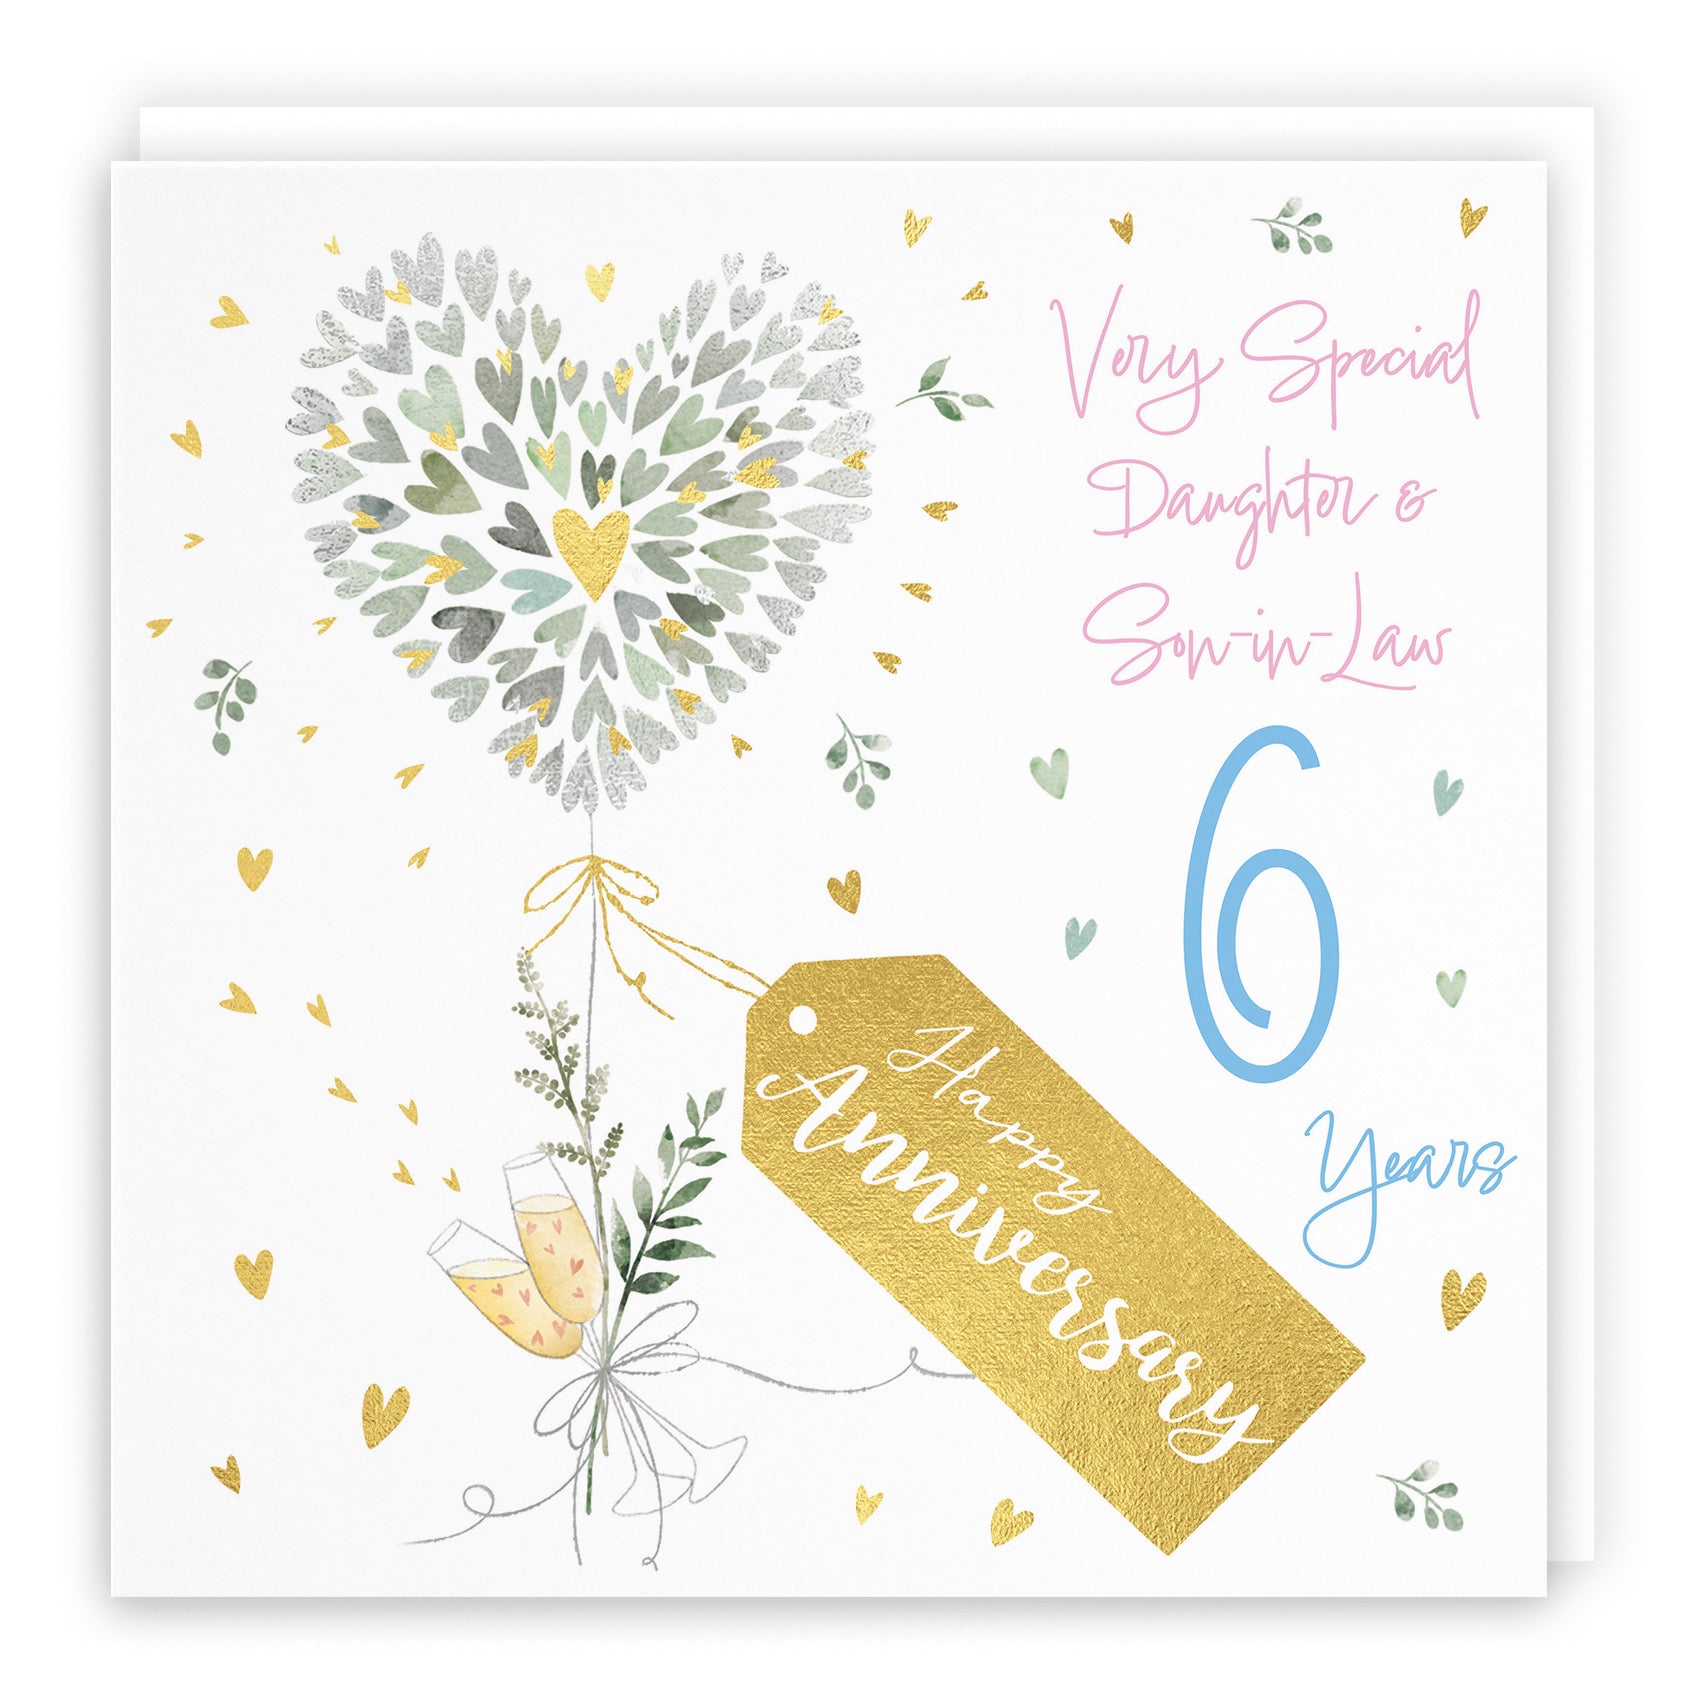 Daughter And Son-in-Law 6th Anniversary Card Contemporary Hearts Milo's Gallery - Default Title (B0CKJ55JCD)